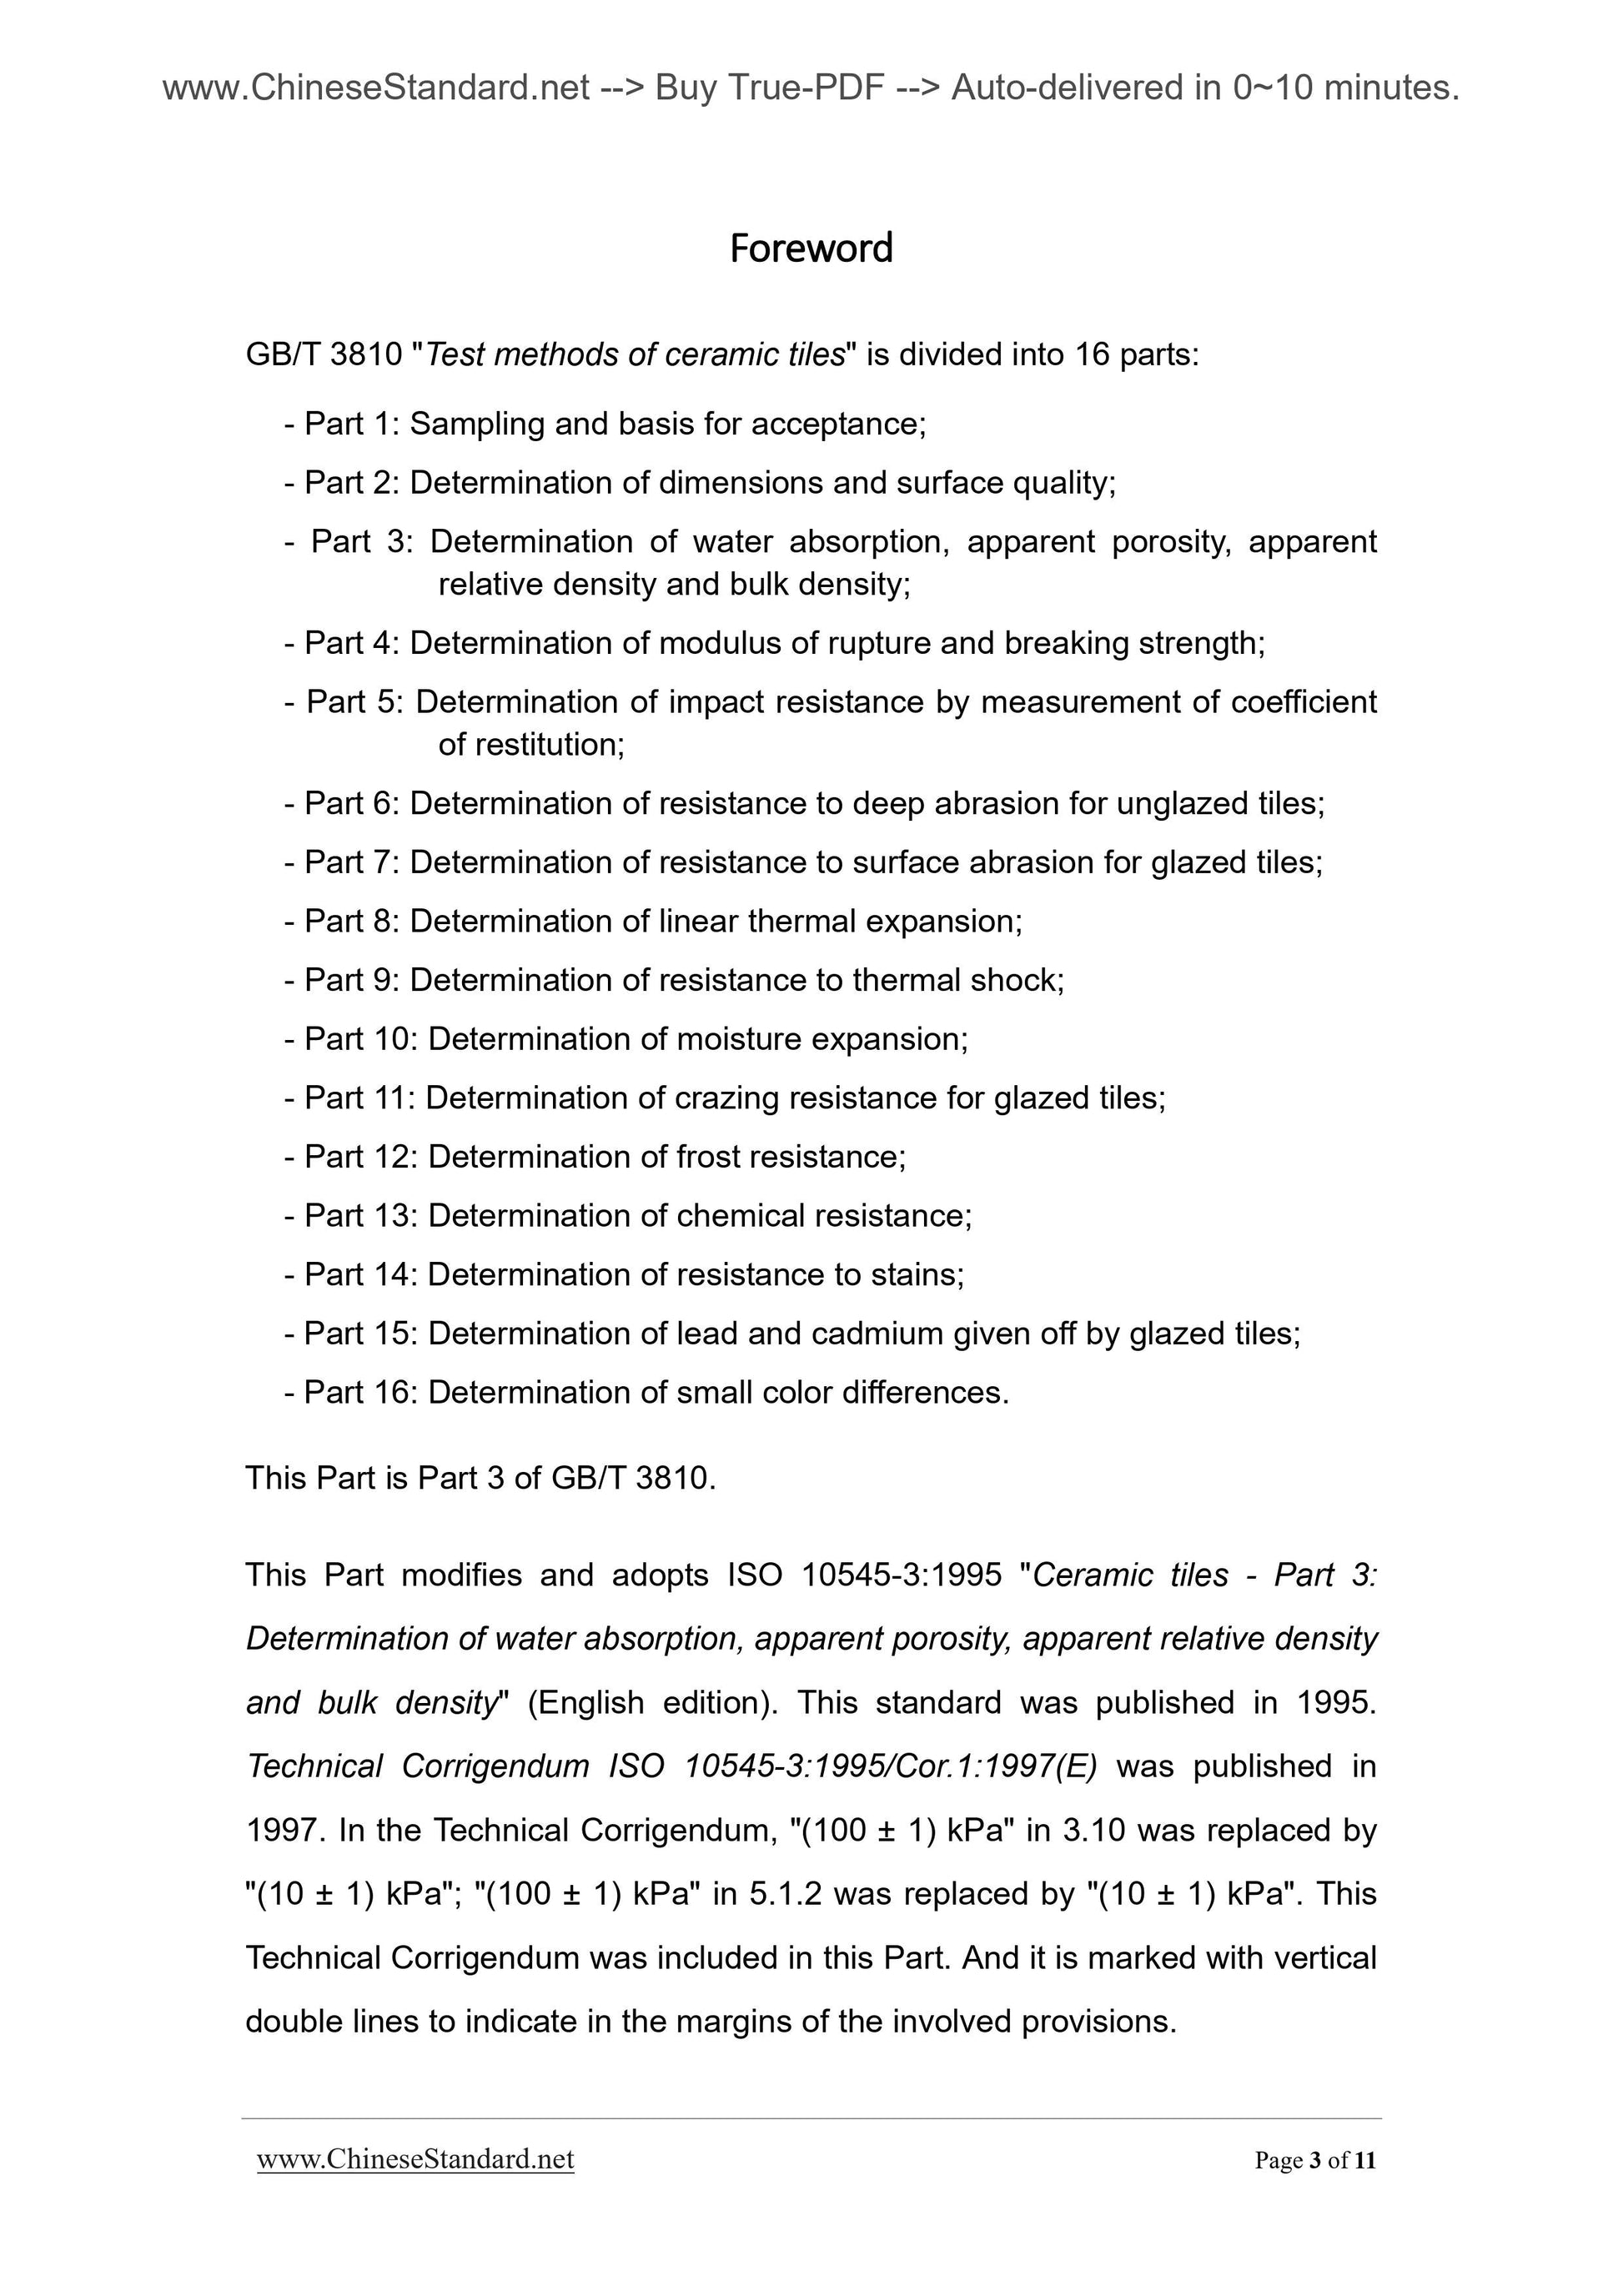 GB/T 3810.3-2006 Page 3